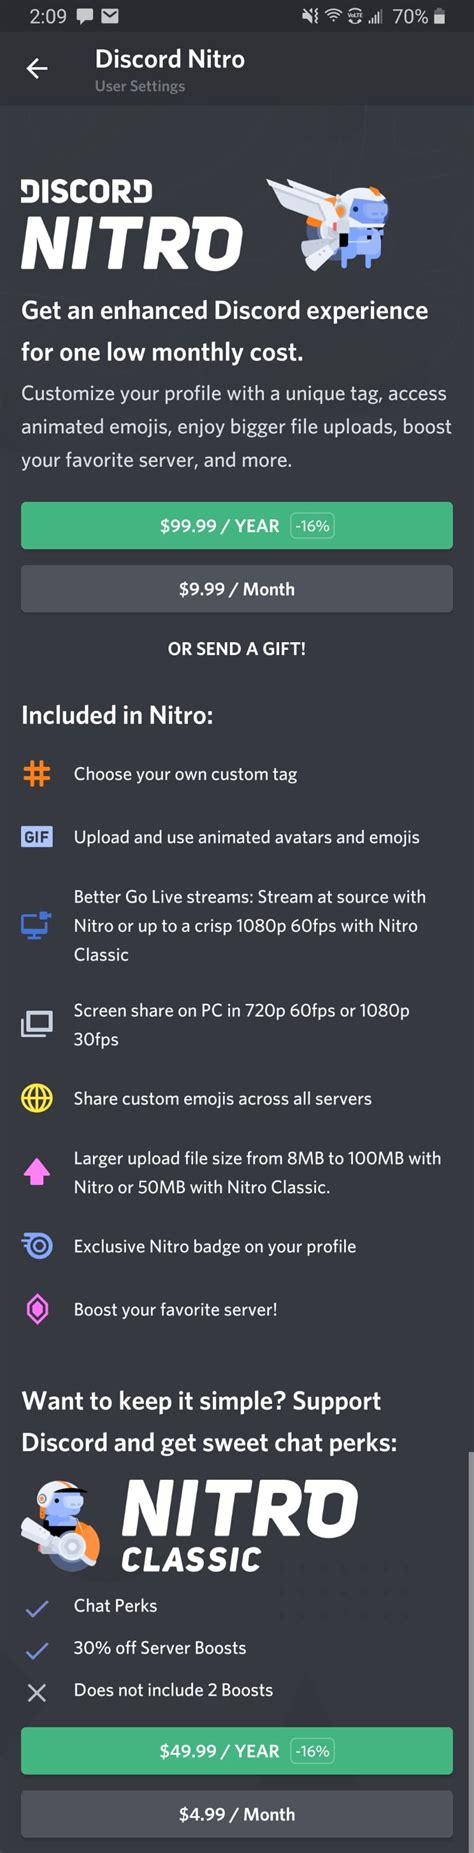 Did They Remove The Nitro Classic Features And Make Them Nitro